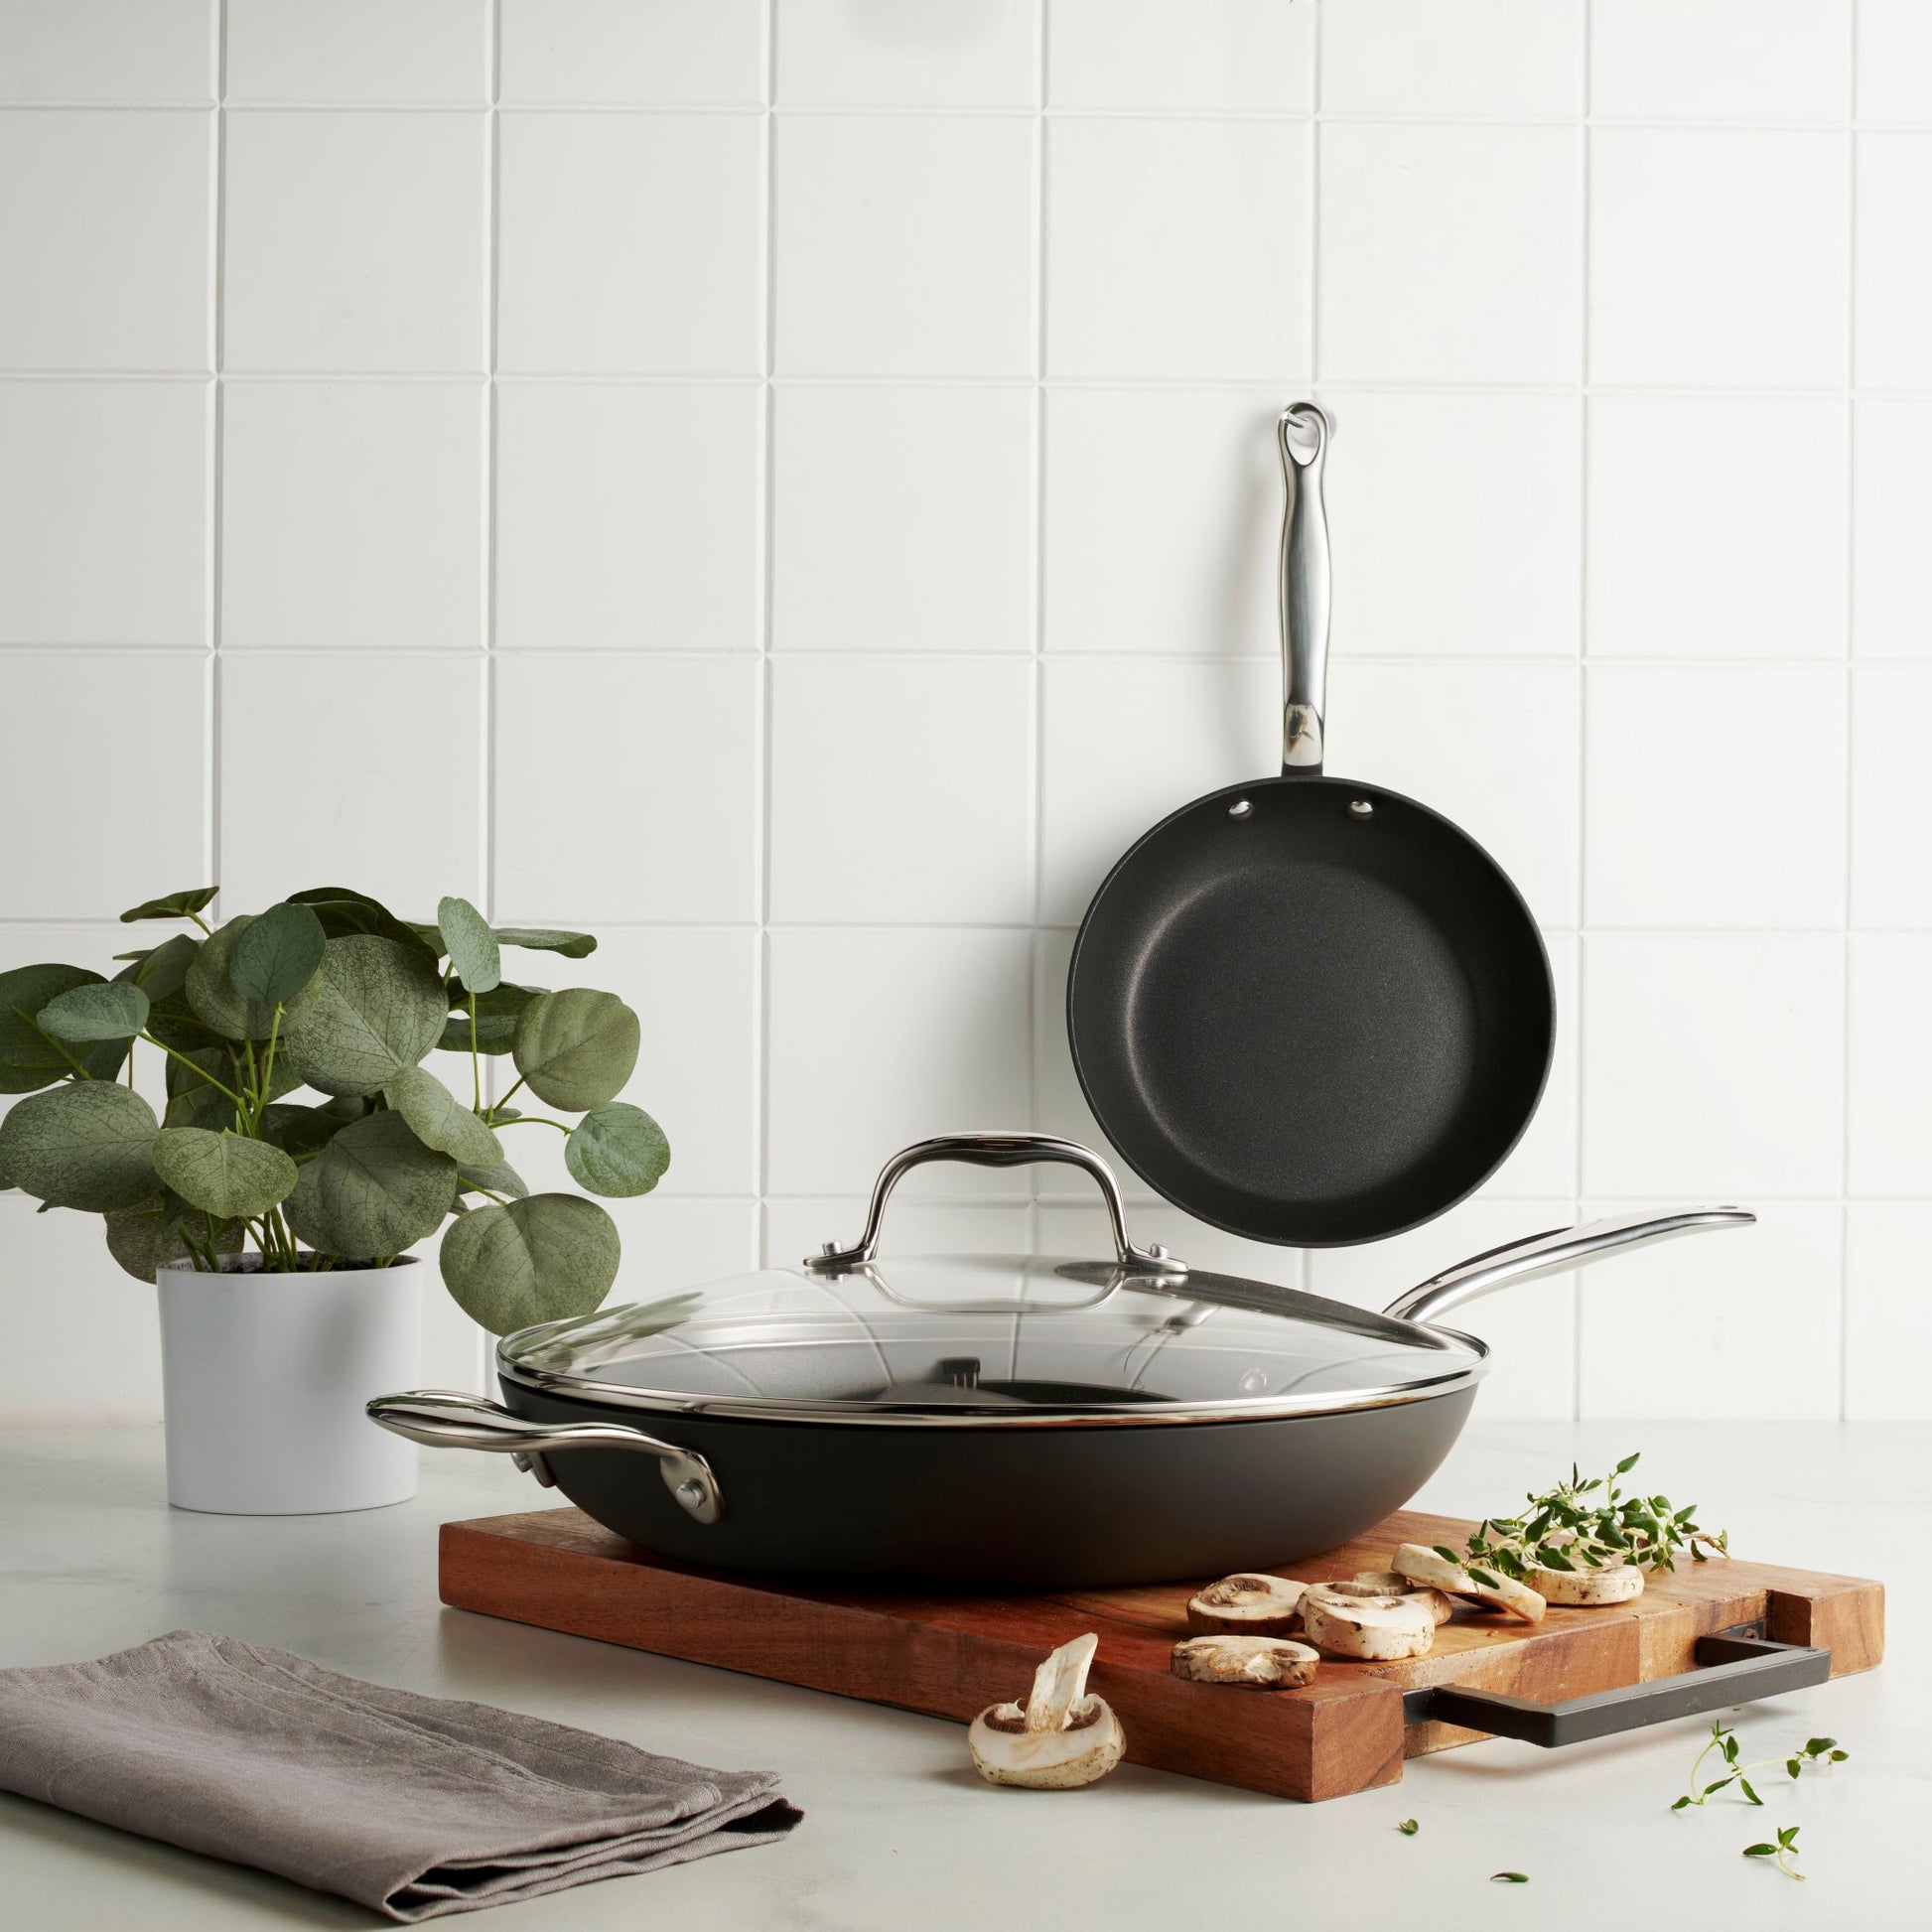  Sardel 3pcs Carbon Steel Cookware Set  Develops a Slick  Non-Stick Coating With Use: Home & Kitchen